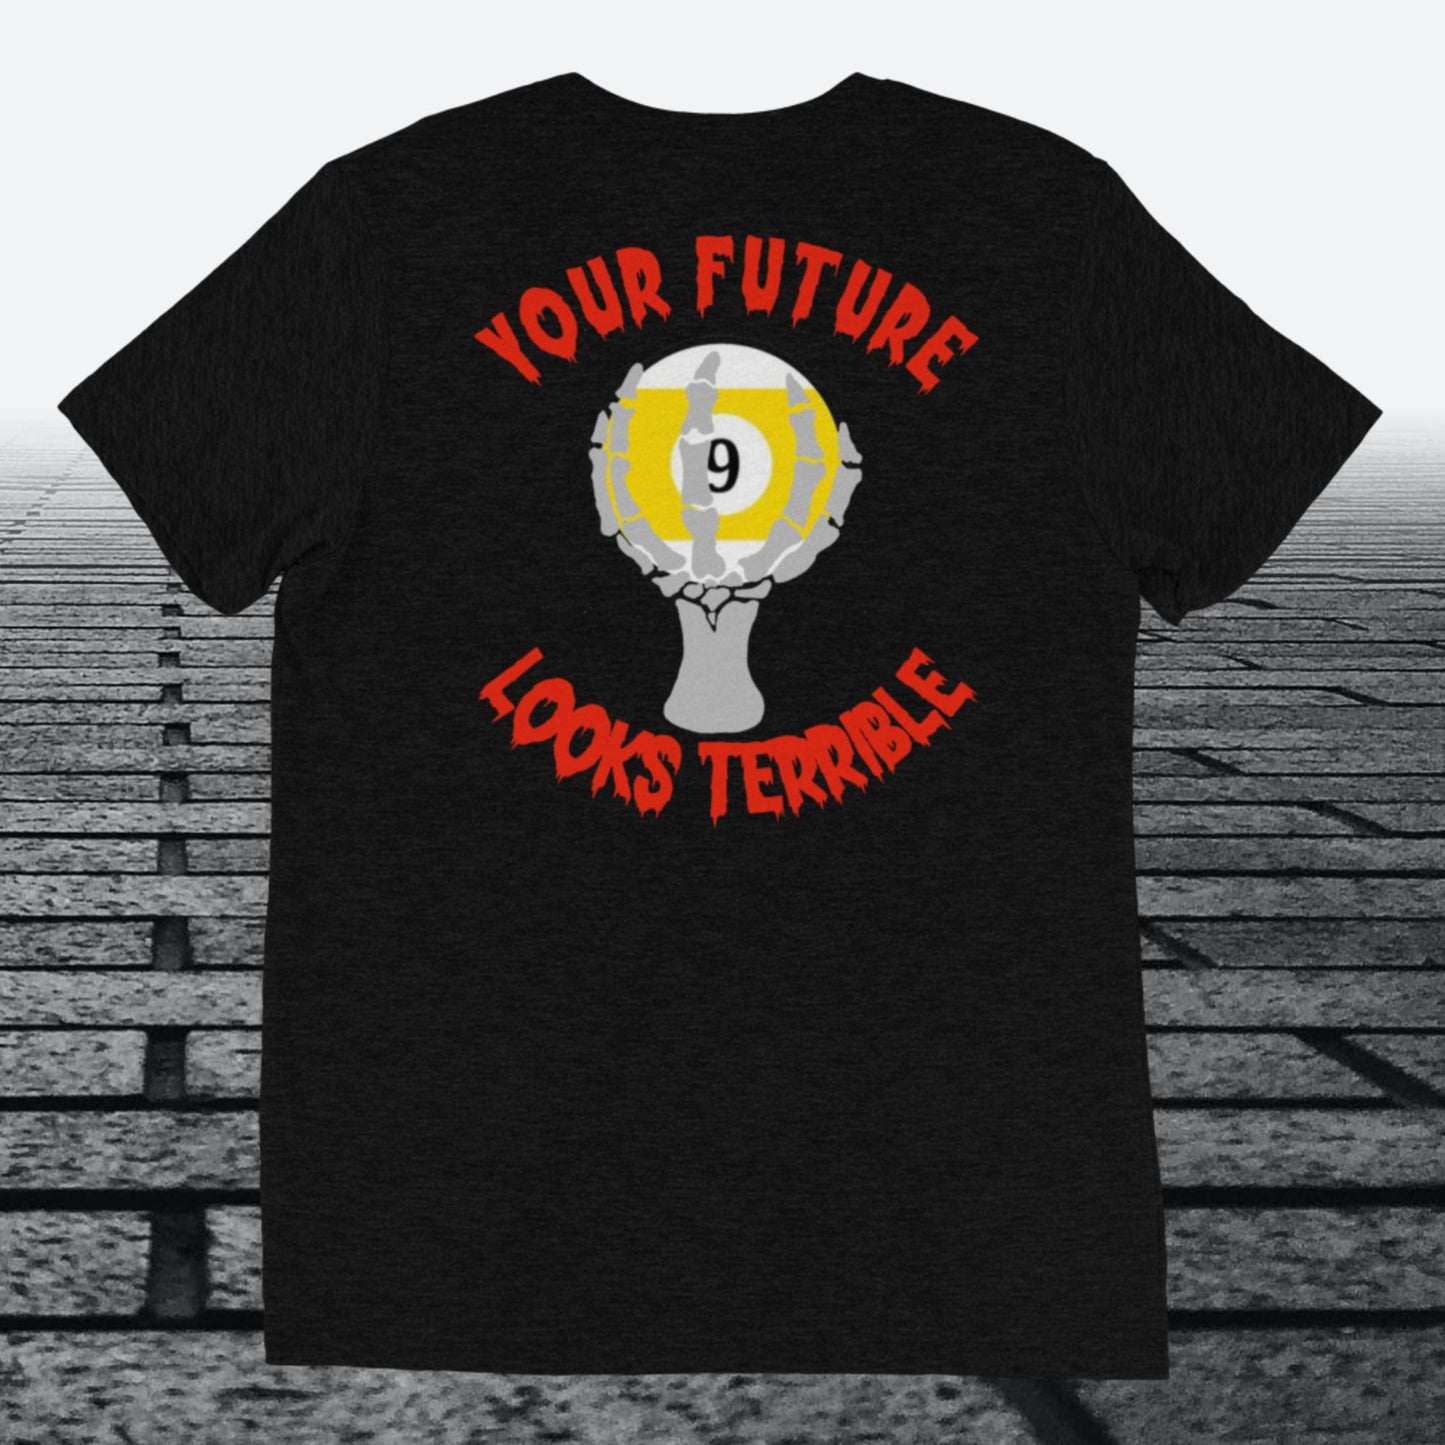 Your Future Looks Terrible with 9 ball, with Logo on the front,  Tri-blend t-shirt